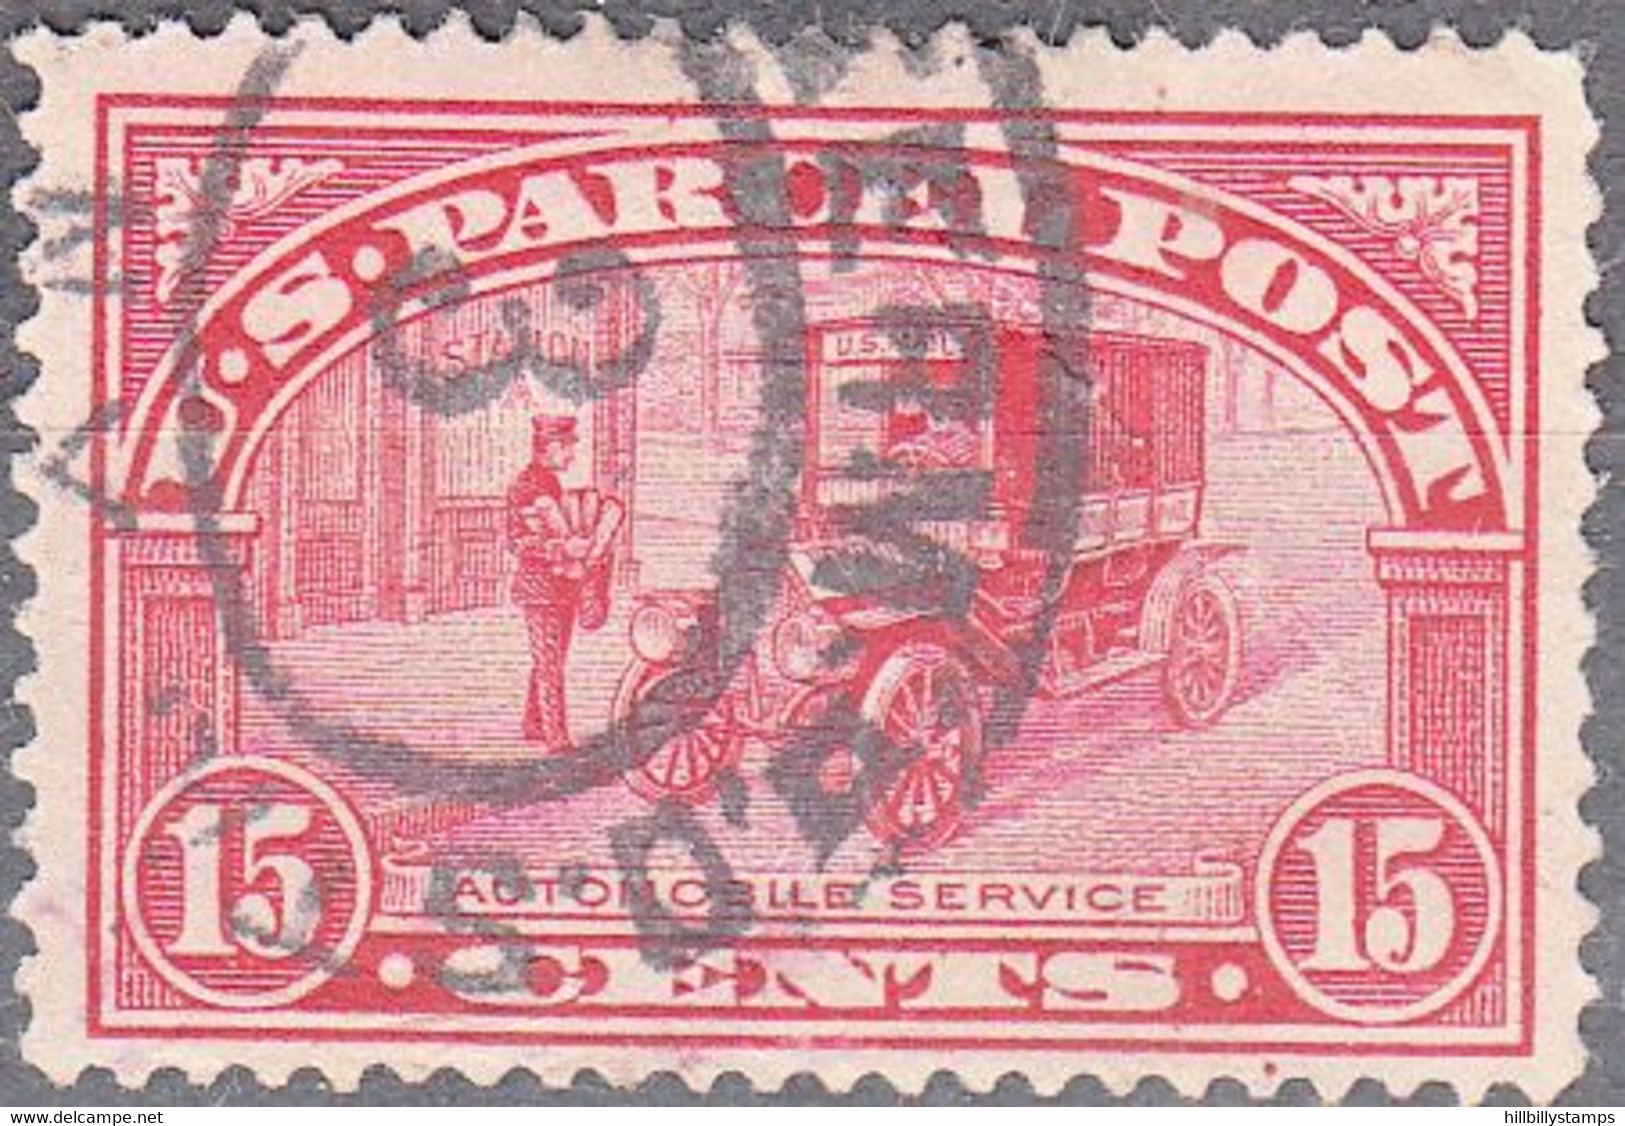 UNITED STATES    SCOTT NO Q7   USED  YEAR  1913 - Parcel Post & Special Handling